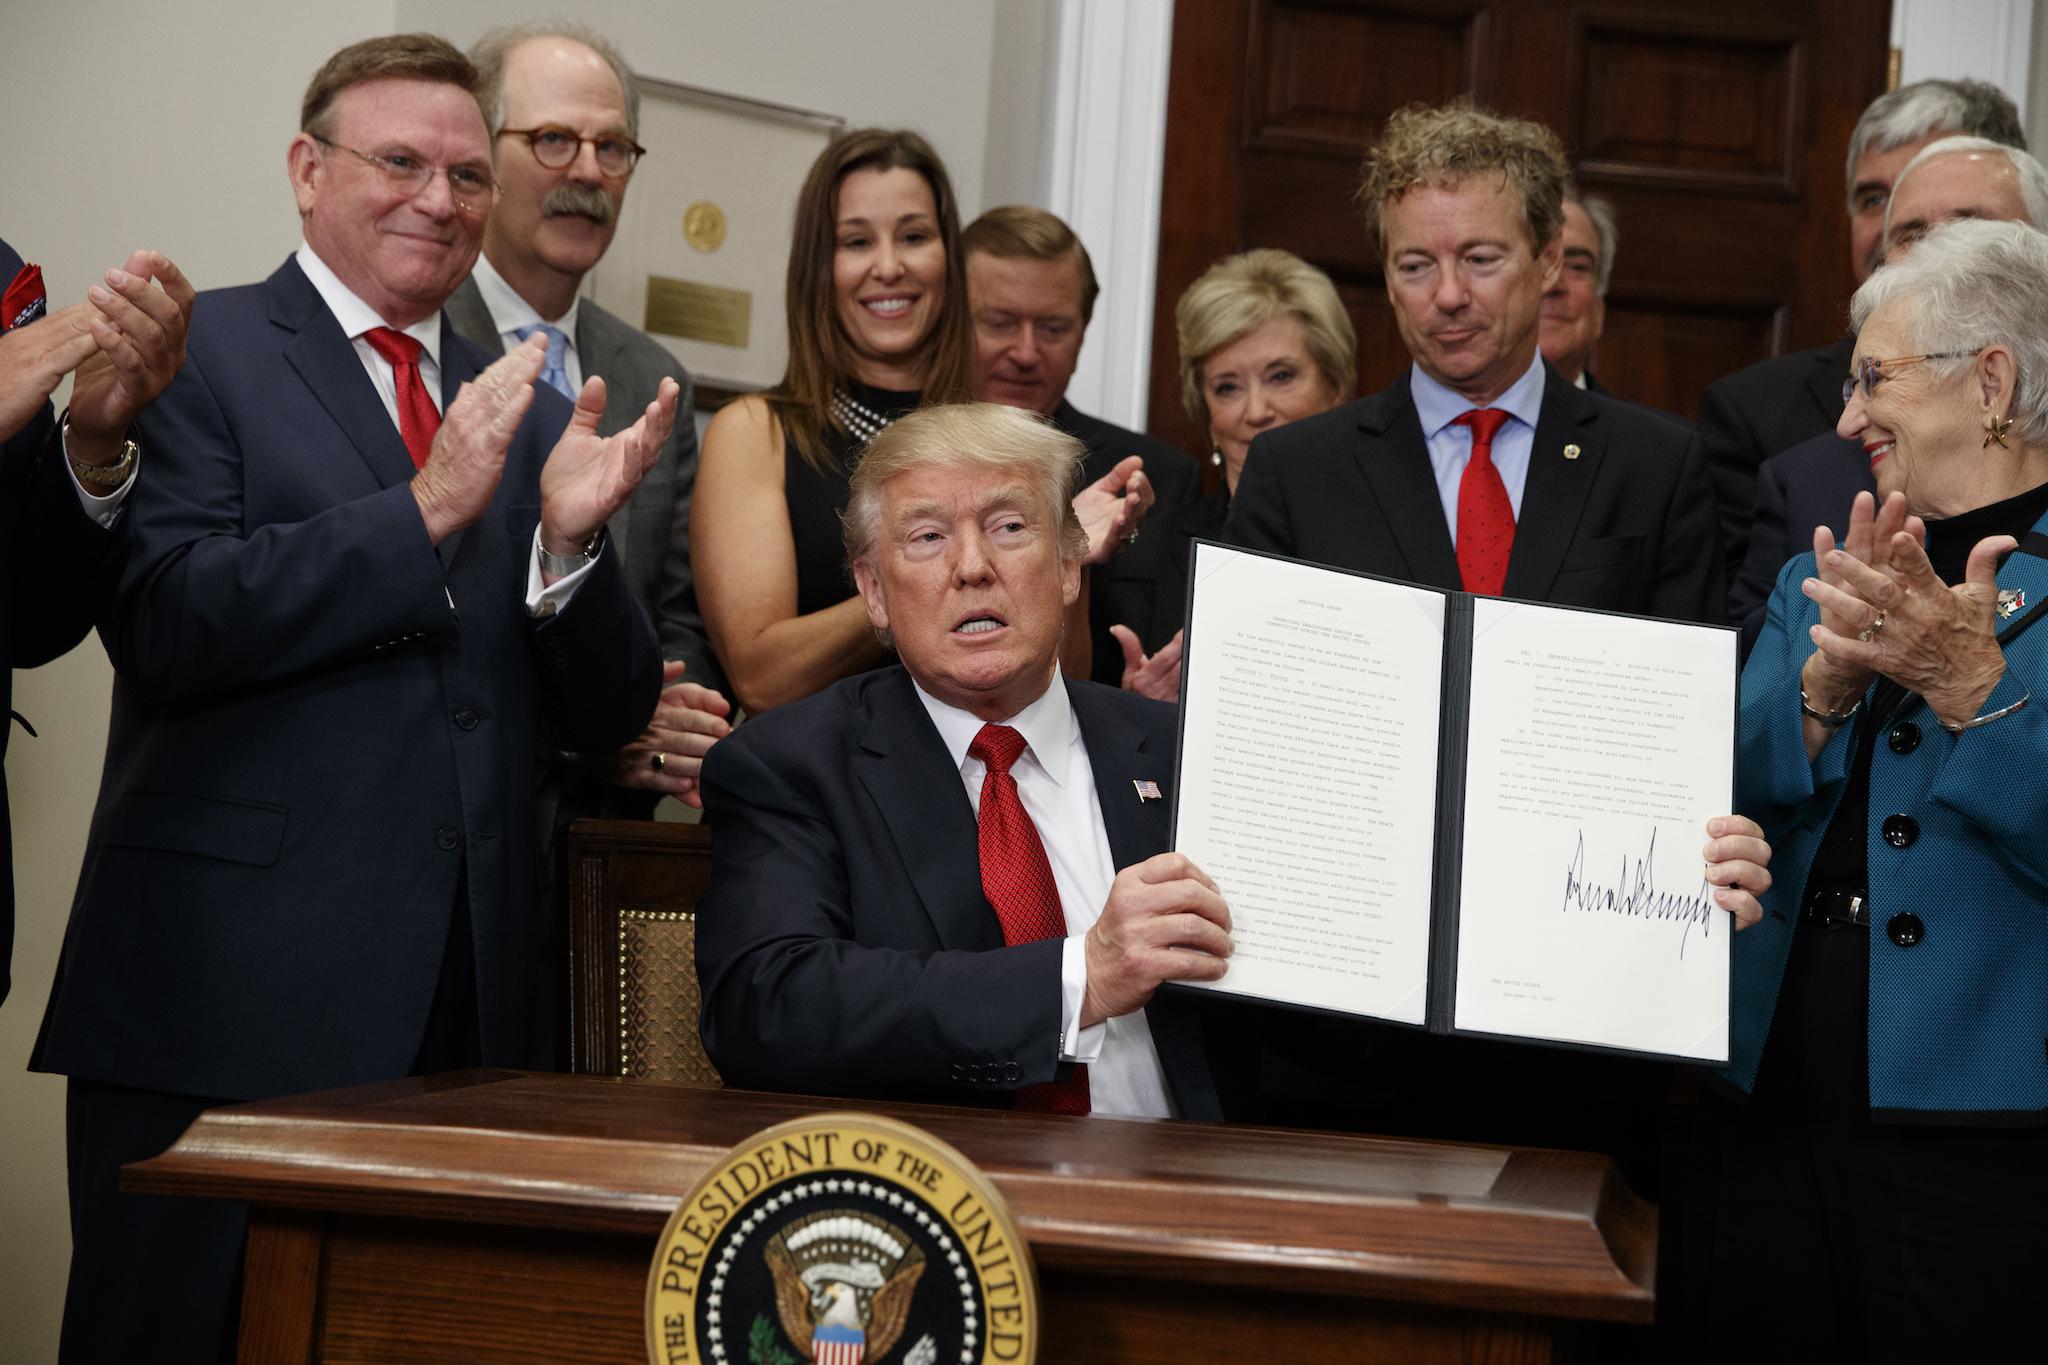 President Donald Trump shows an executive order on healthcare that he signed in the Roosevelt Room of the White House